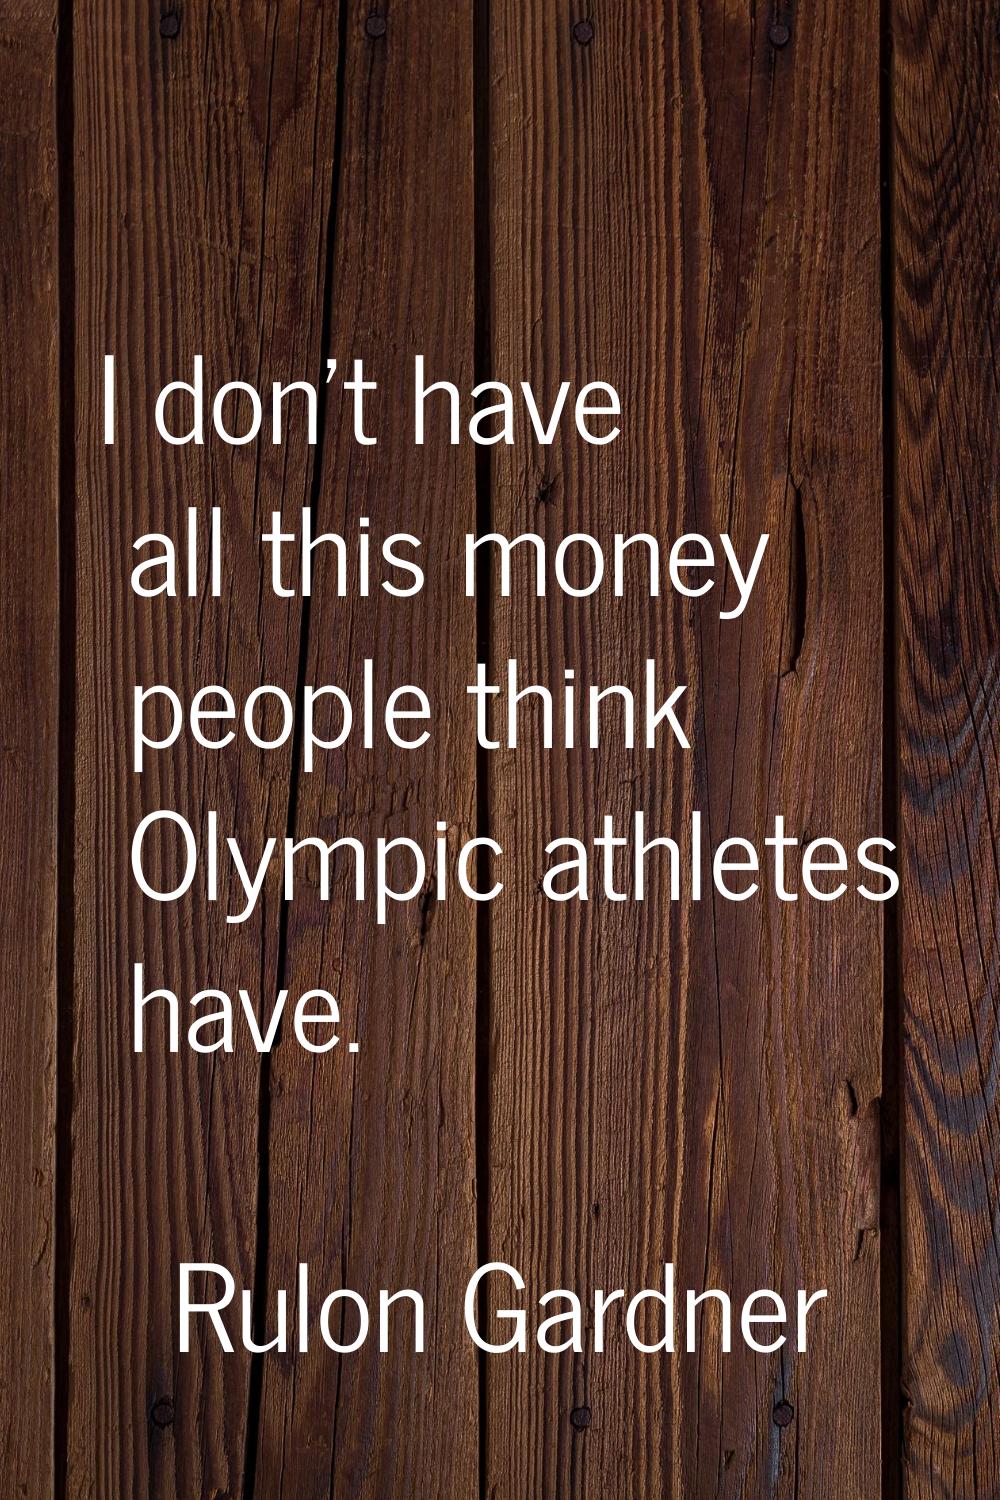 I don't have all this money people think Olympic athletes have.